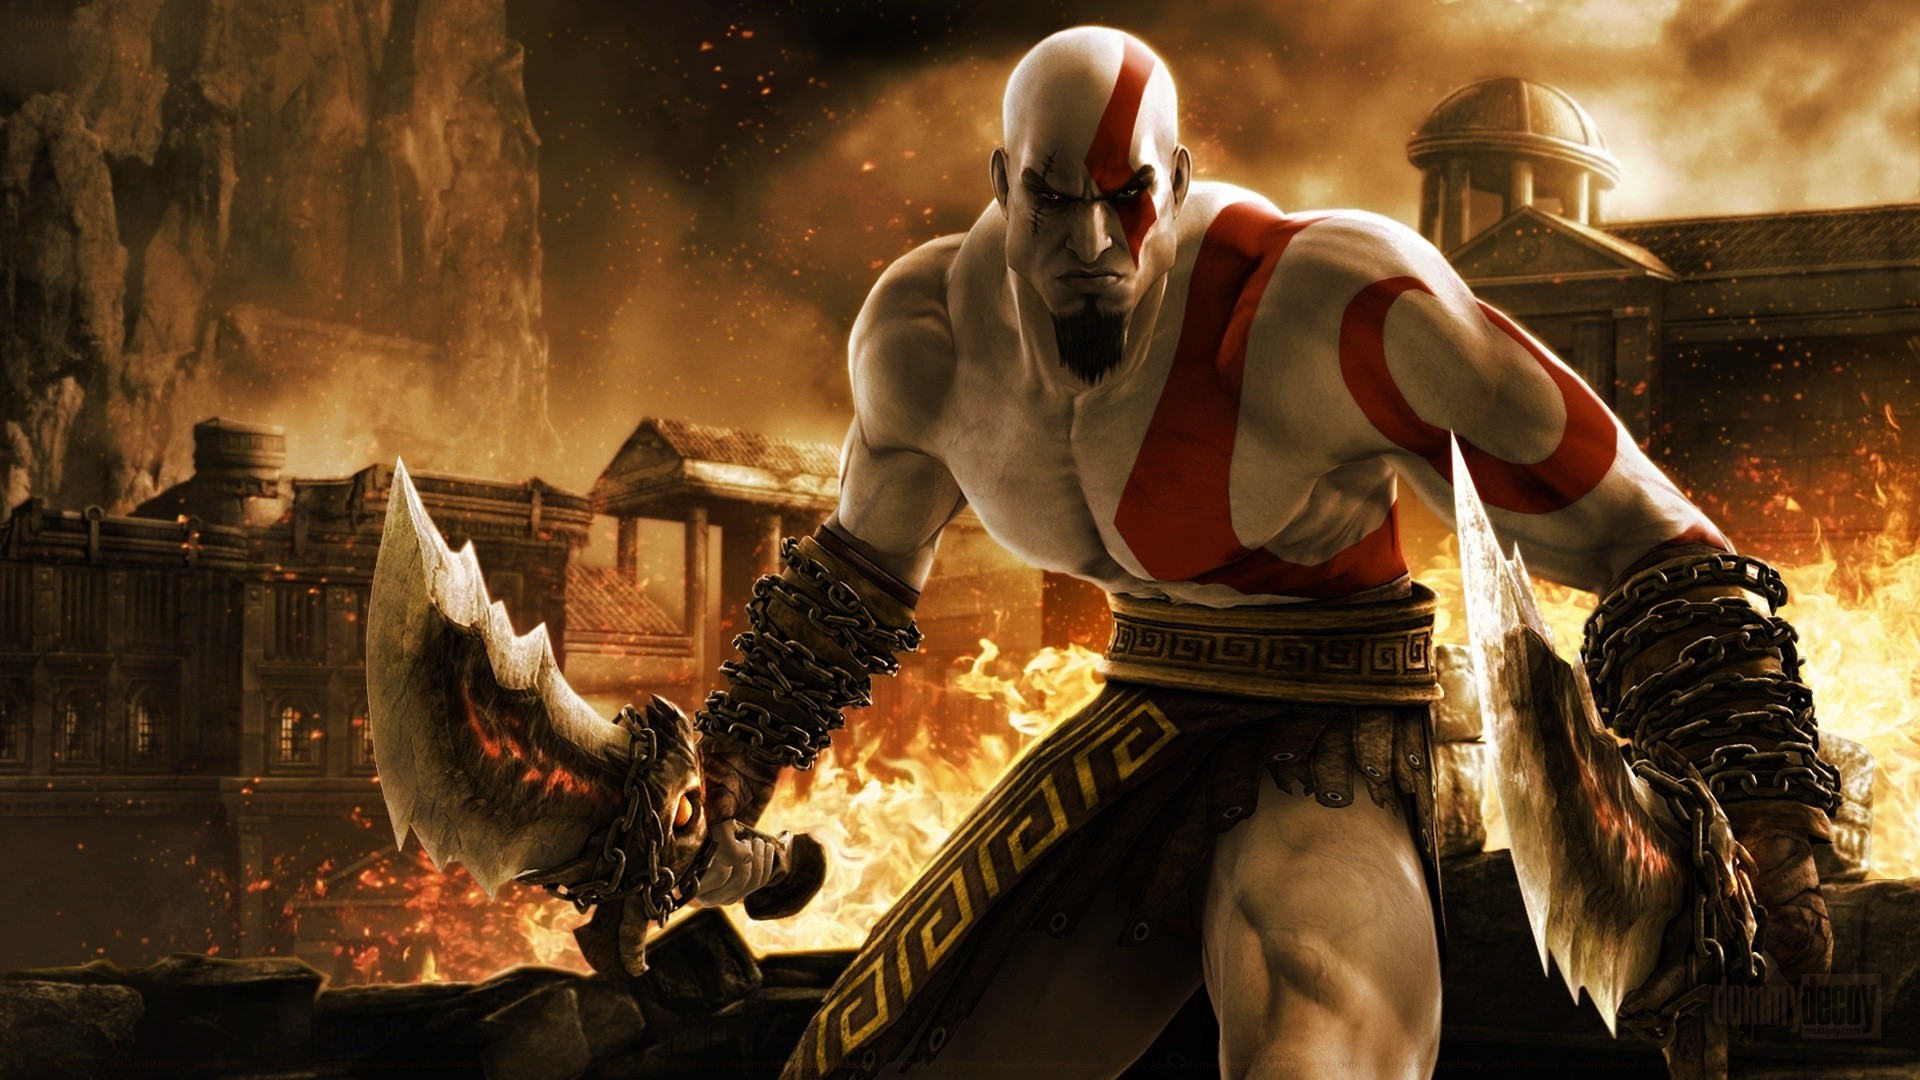 1920x1080  god of war 3 photo cool images free high definition colourful  pictures desktop wallpapers samsung phone wallpapers display 1920Ã—1080 Wallpaper  HD